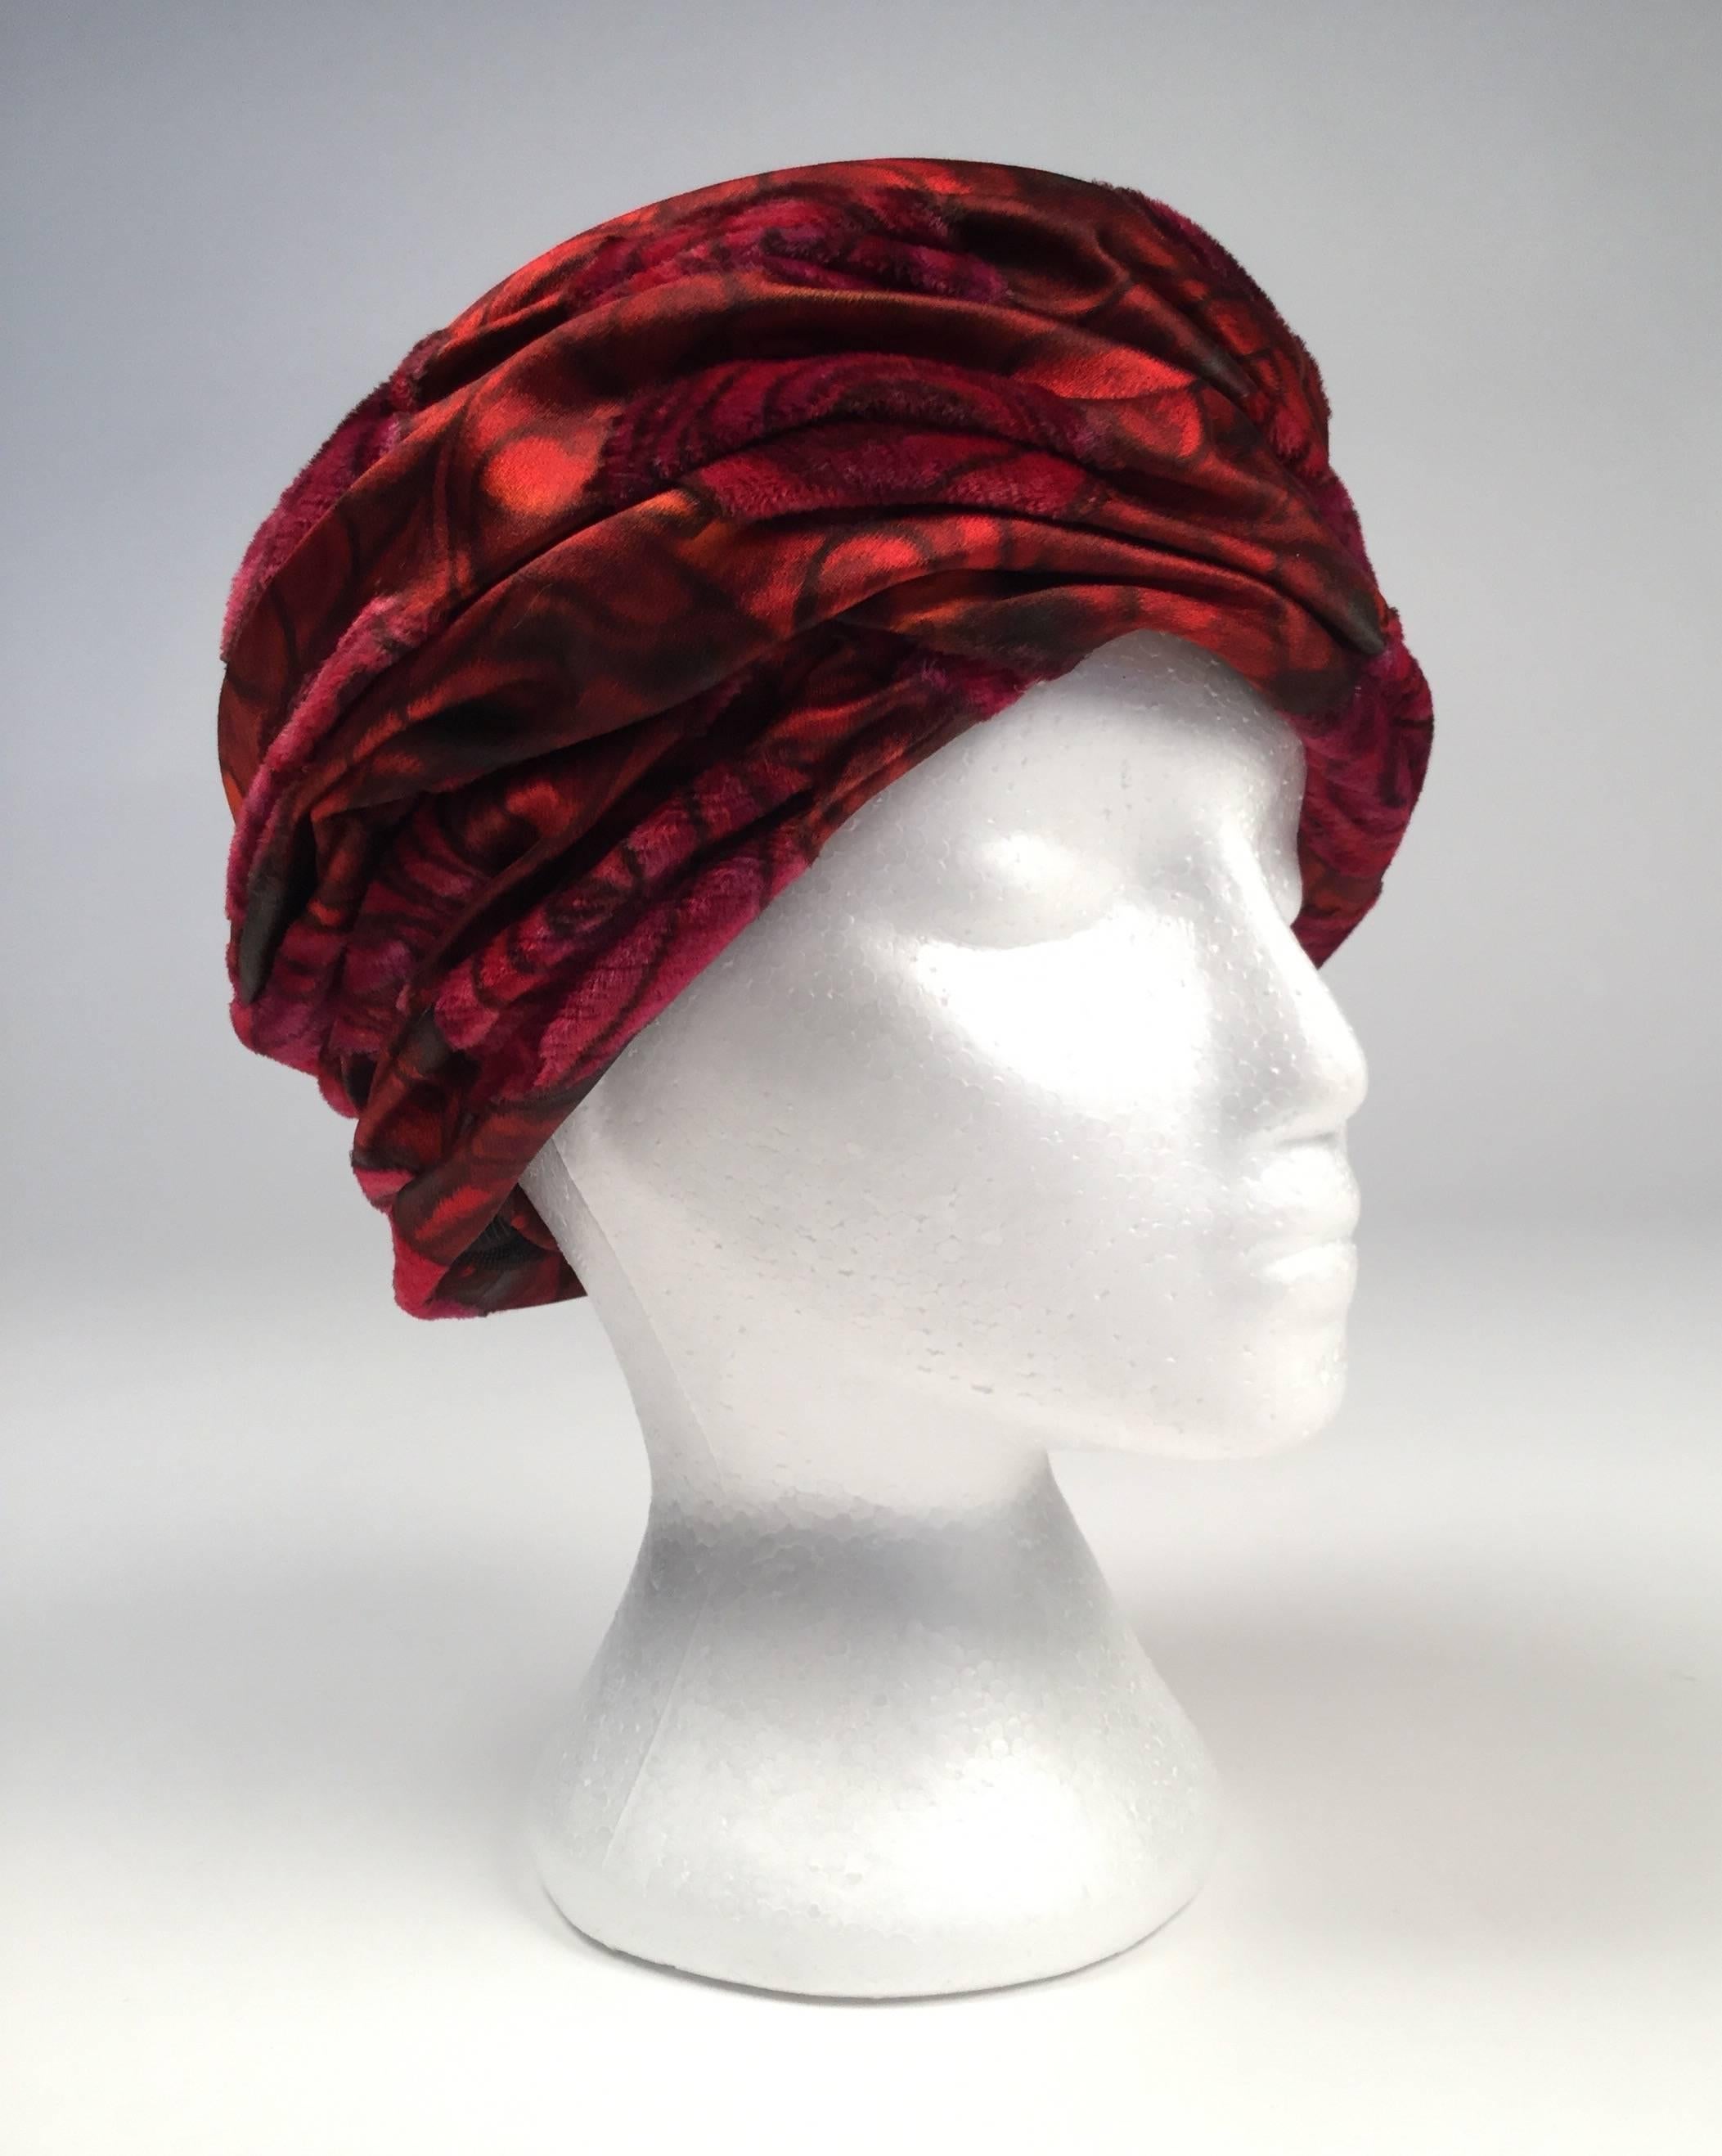 Vintage Christian Dior Red Rose Chapeaux. Roses are velvet and a different texture than the rest of the hat that is also velvet with a shorter pile.  Lining is Oxblood red silk grosgrain fabric.

Hat is 21"

*All garments and accessories have